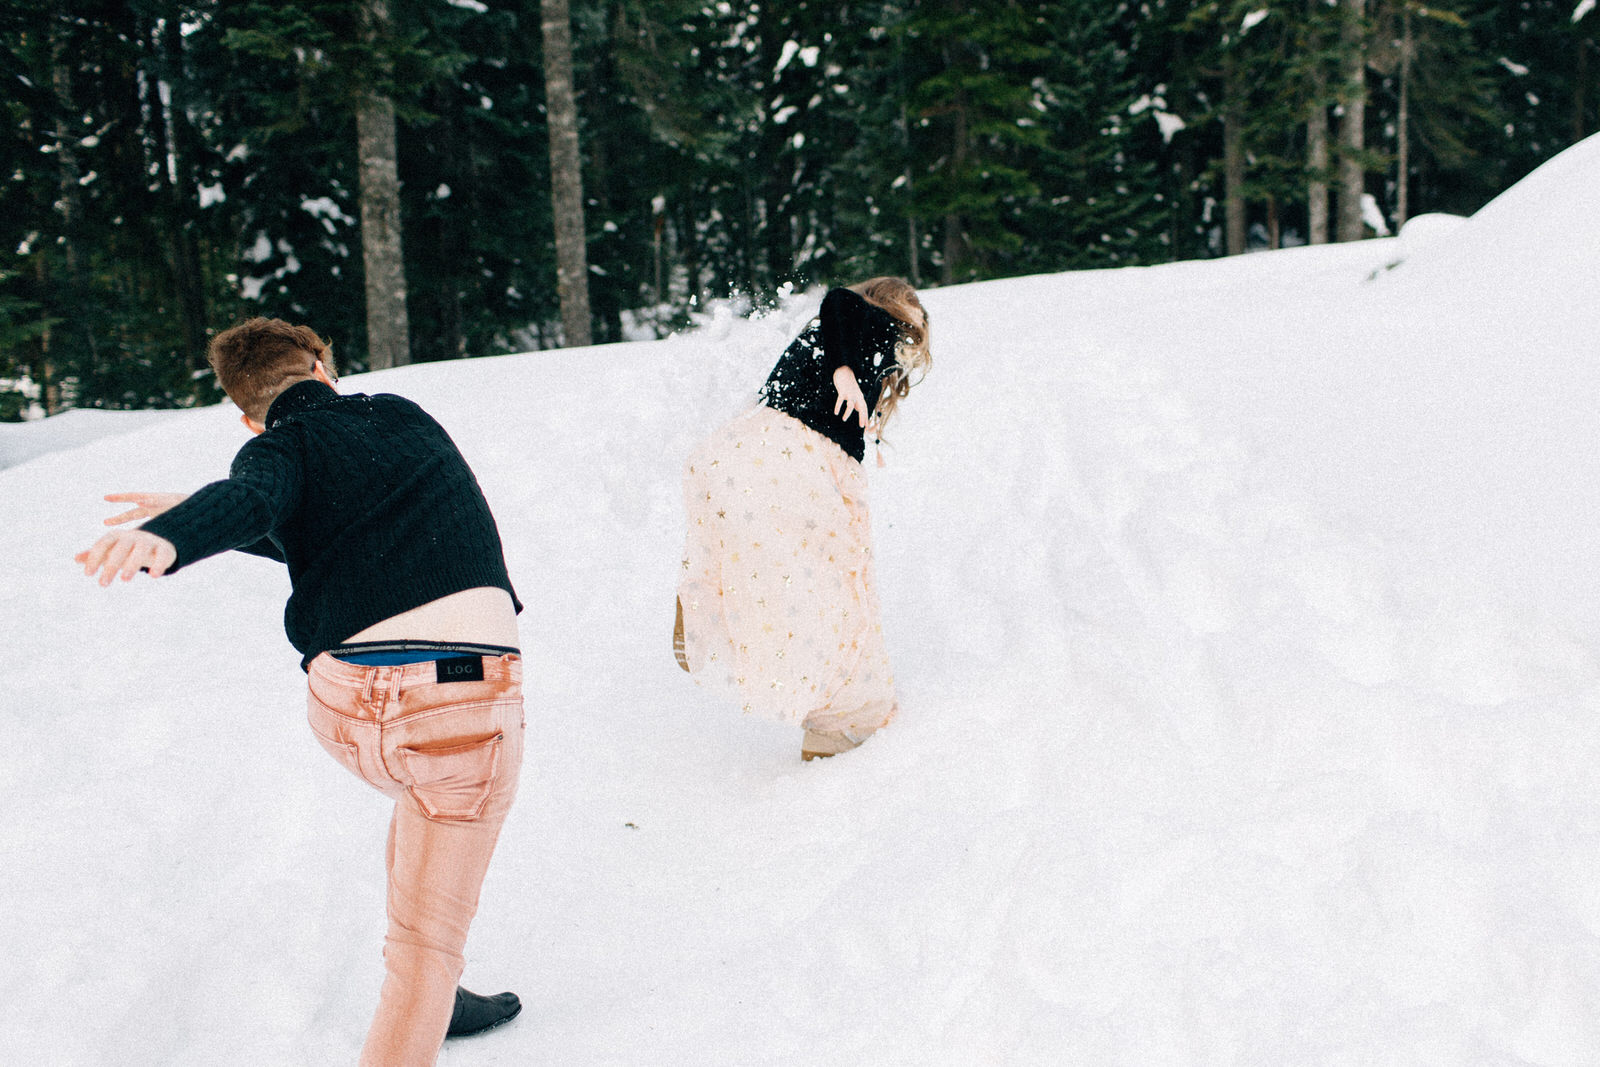 Snoqualmie Pass fuck yeah weddings engagement session snow mountains kendall shea feminist photographer